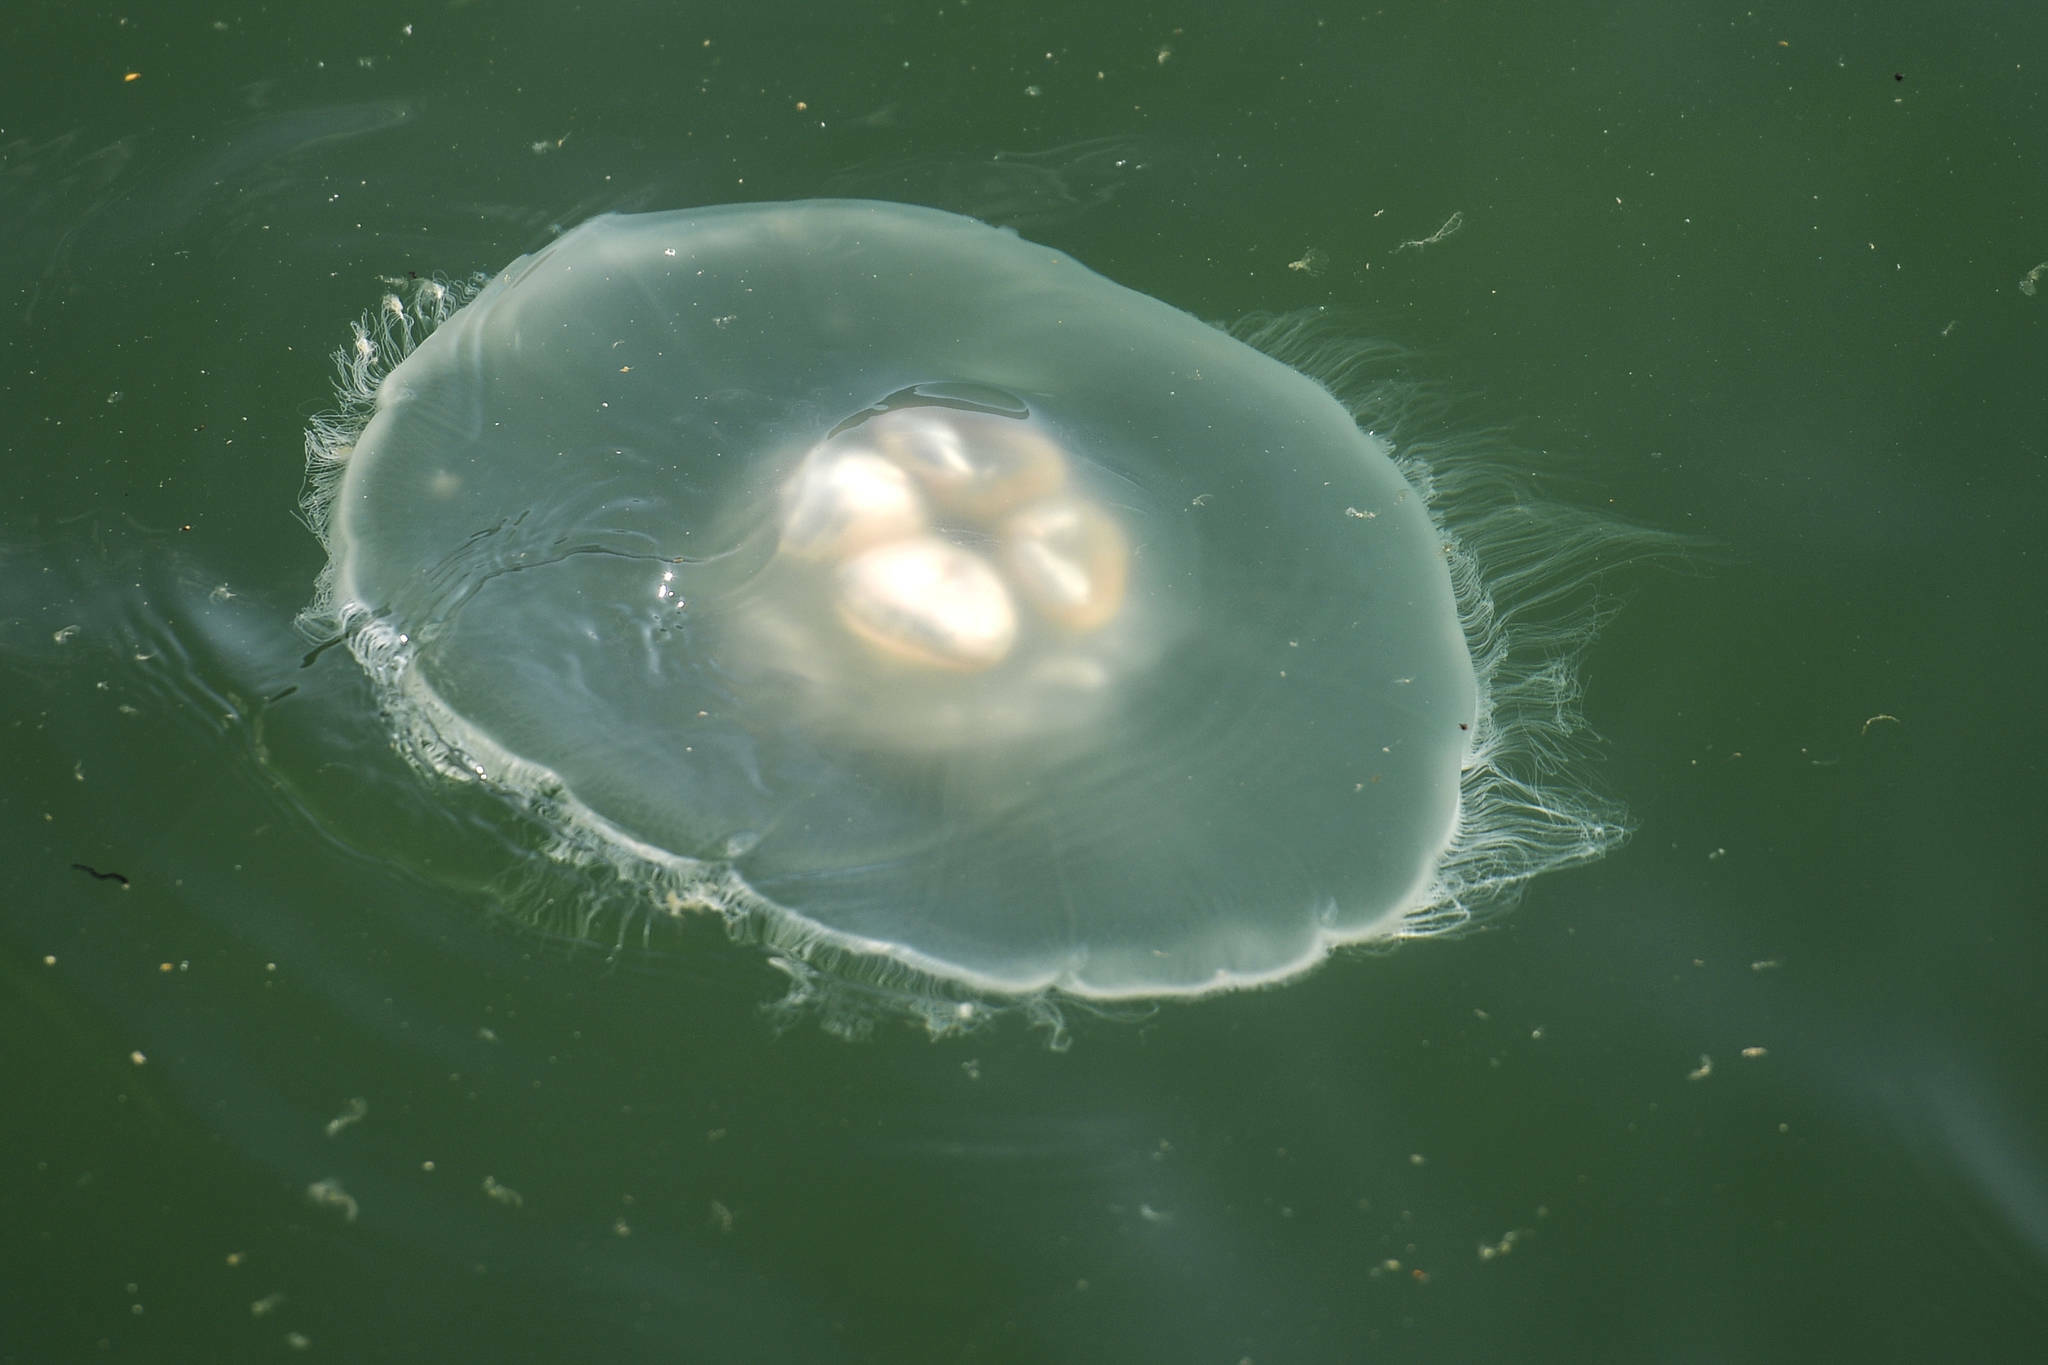 A moon jellyfish swims in Gastineau Channel on Sept. 5, 2019. (Michael Penn / Juneau Empire File)